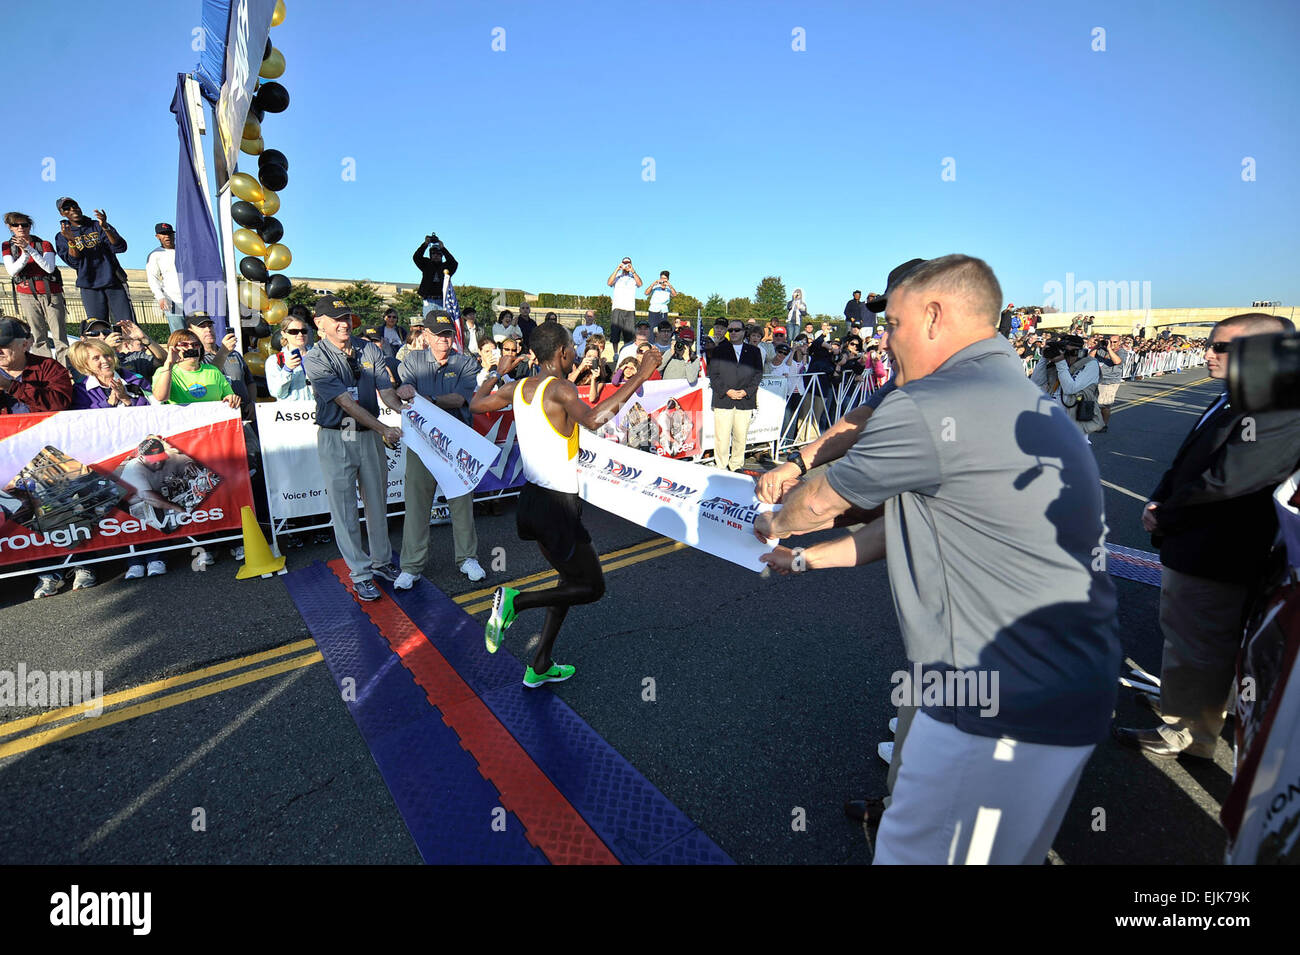 Retired Army Gen. Gordon R. Sullivan, President &amp; Chief Operating Officer of the Association of the United States Army, Gen. Raymond T. Odierno, Chief of Staff of the Army, Hon. John McHugh, Secretary of the Army, and Sergeant Major of the Army Raymond F. Chandler III  hold a banner at the finish line for the winner of the 2011 Army Ten Miler in Washington, D.C. Oct. 9, 2011.  Staff Sgt. Teddy Wade Stock Photo